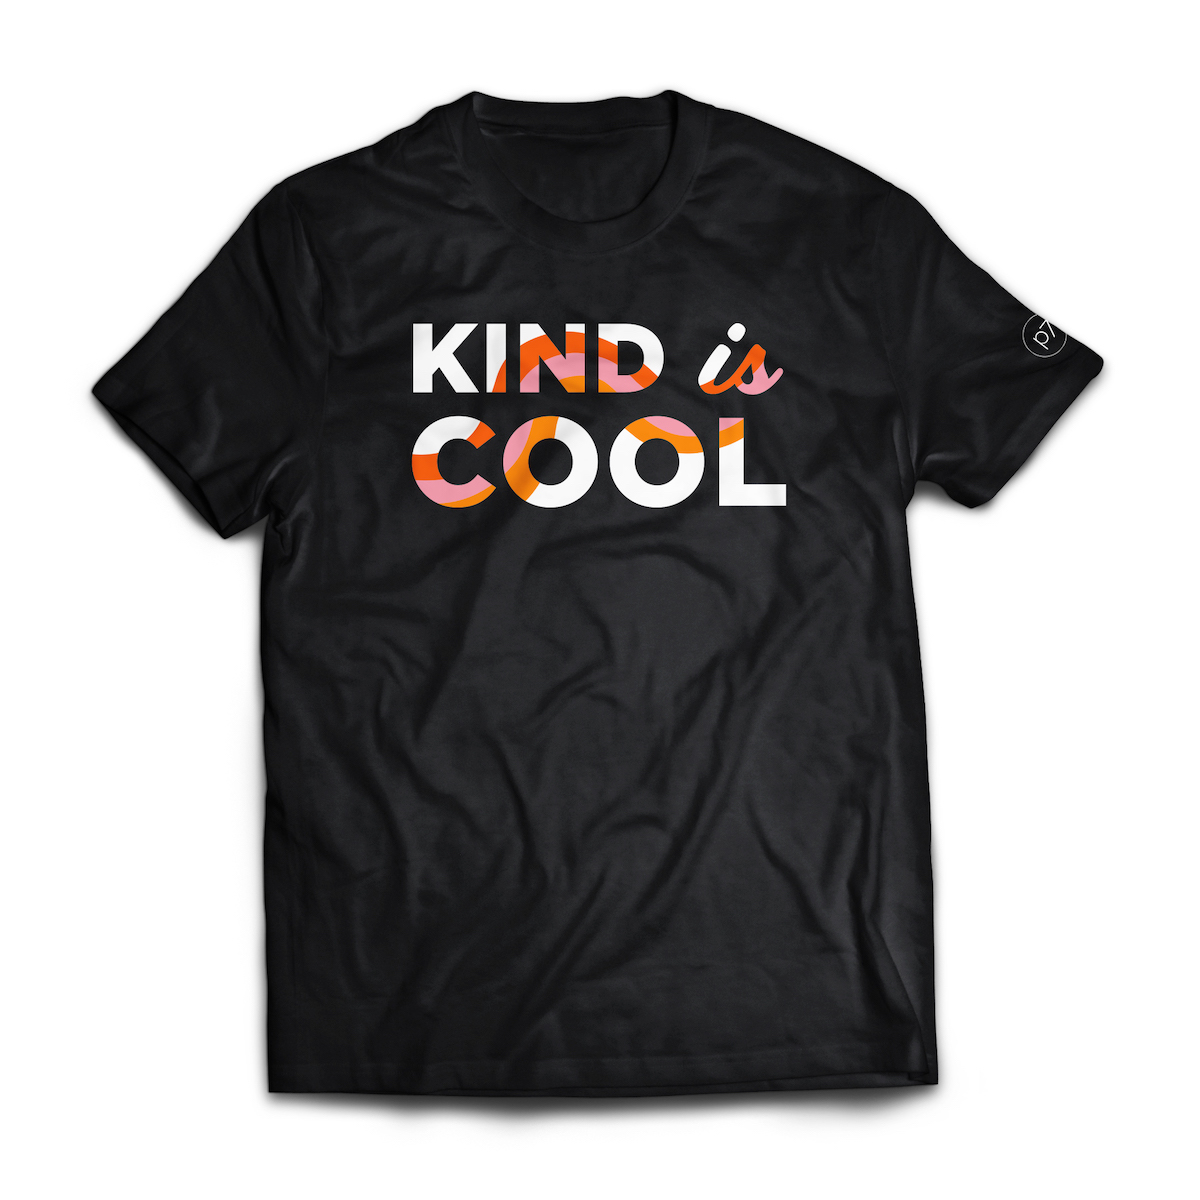 Black T-shirt that says Kind is Cool